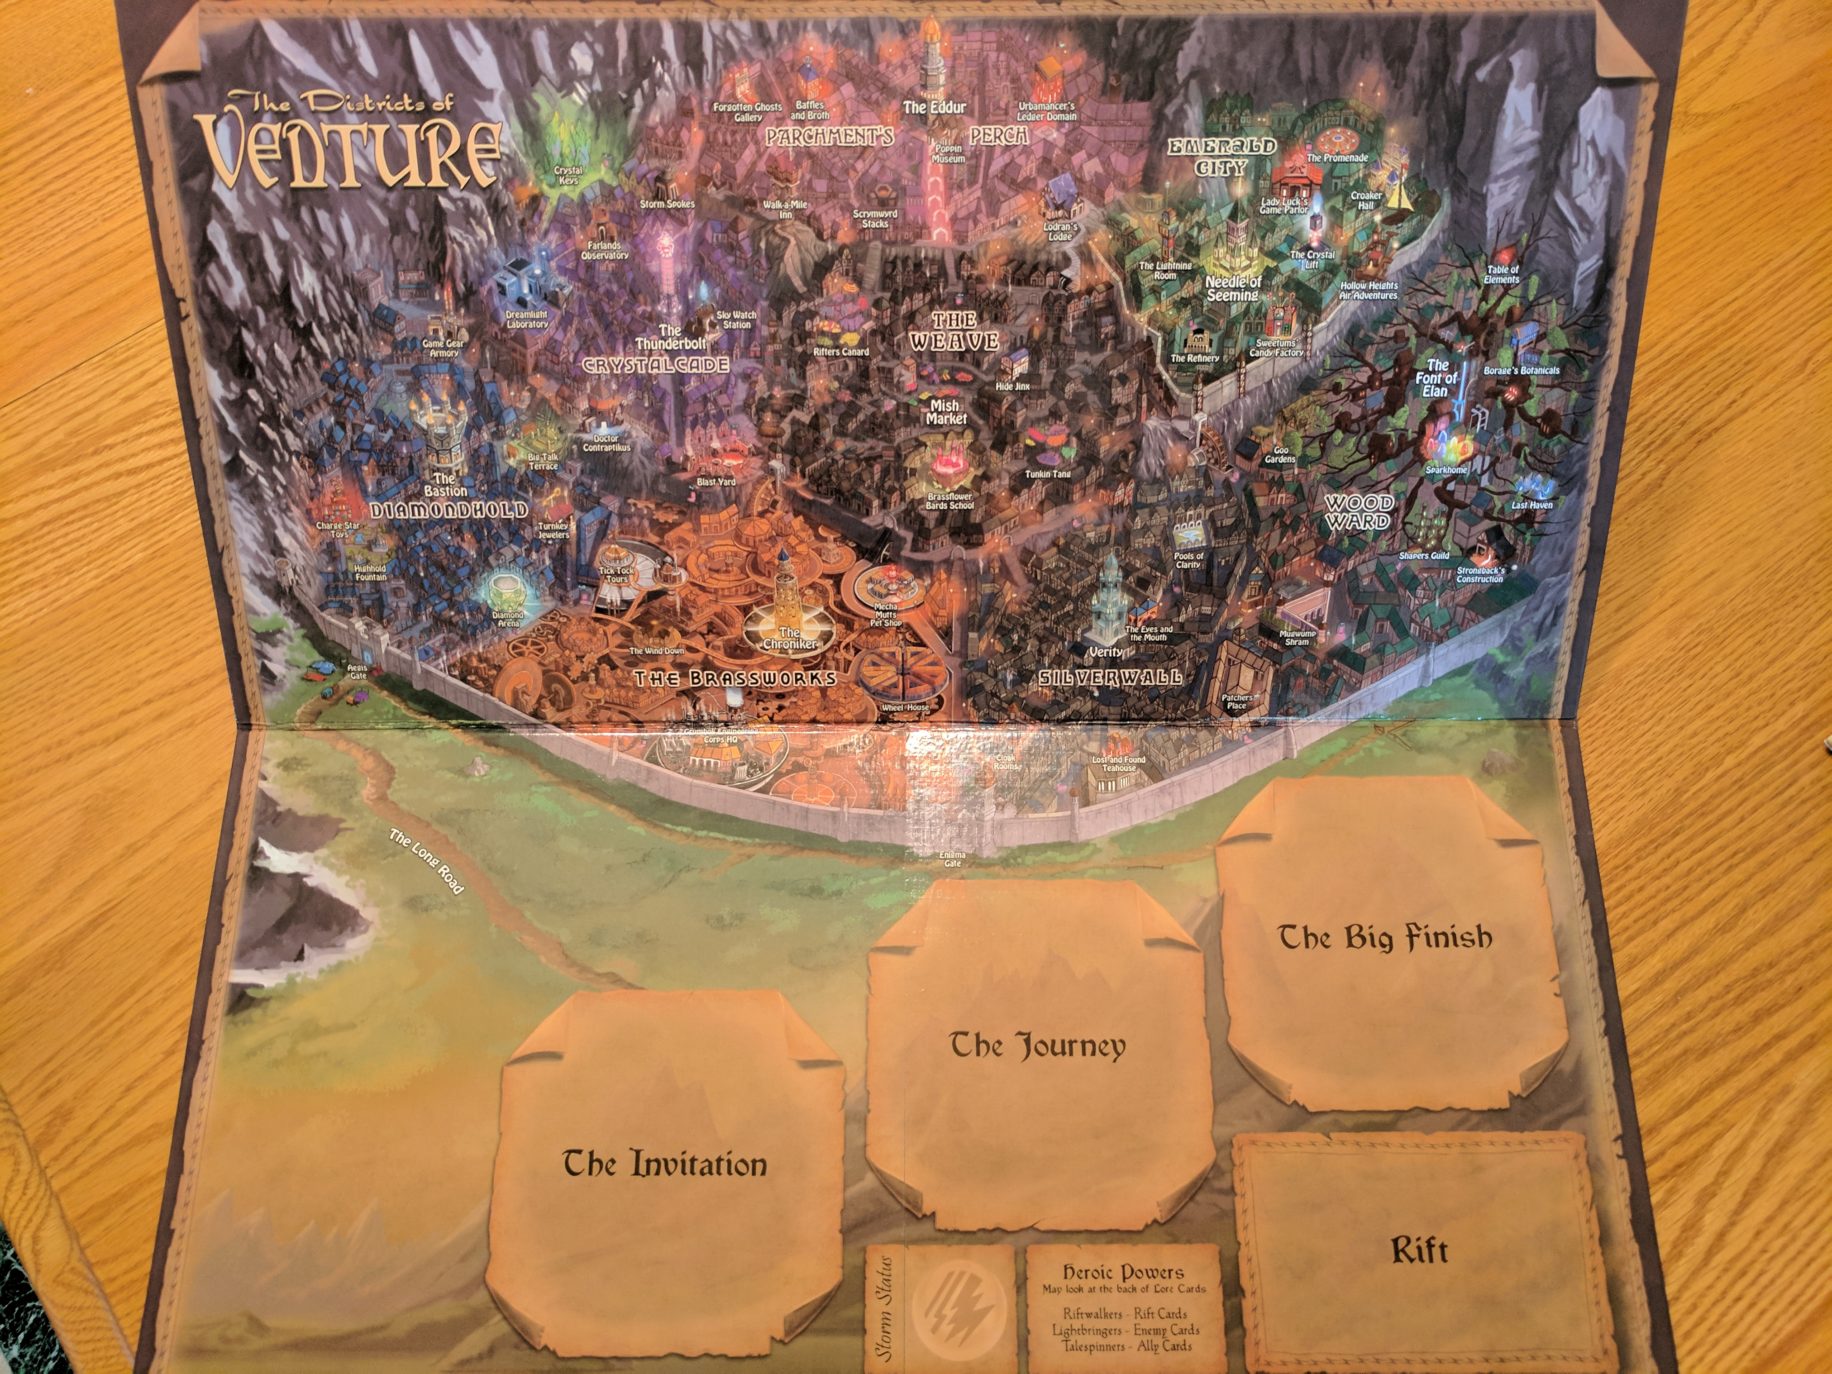 Storm Hollow Tales of a New Age Map of Venture